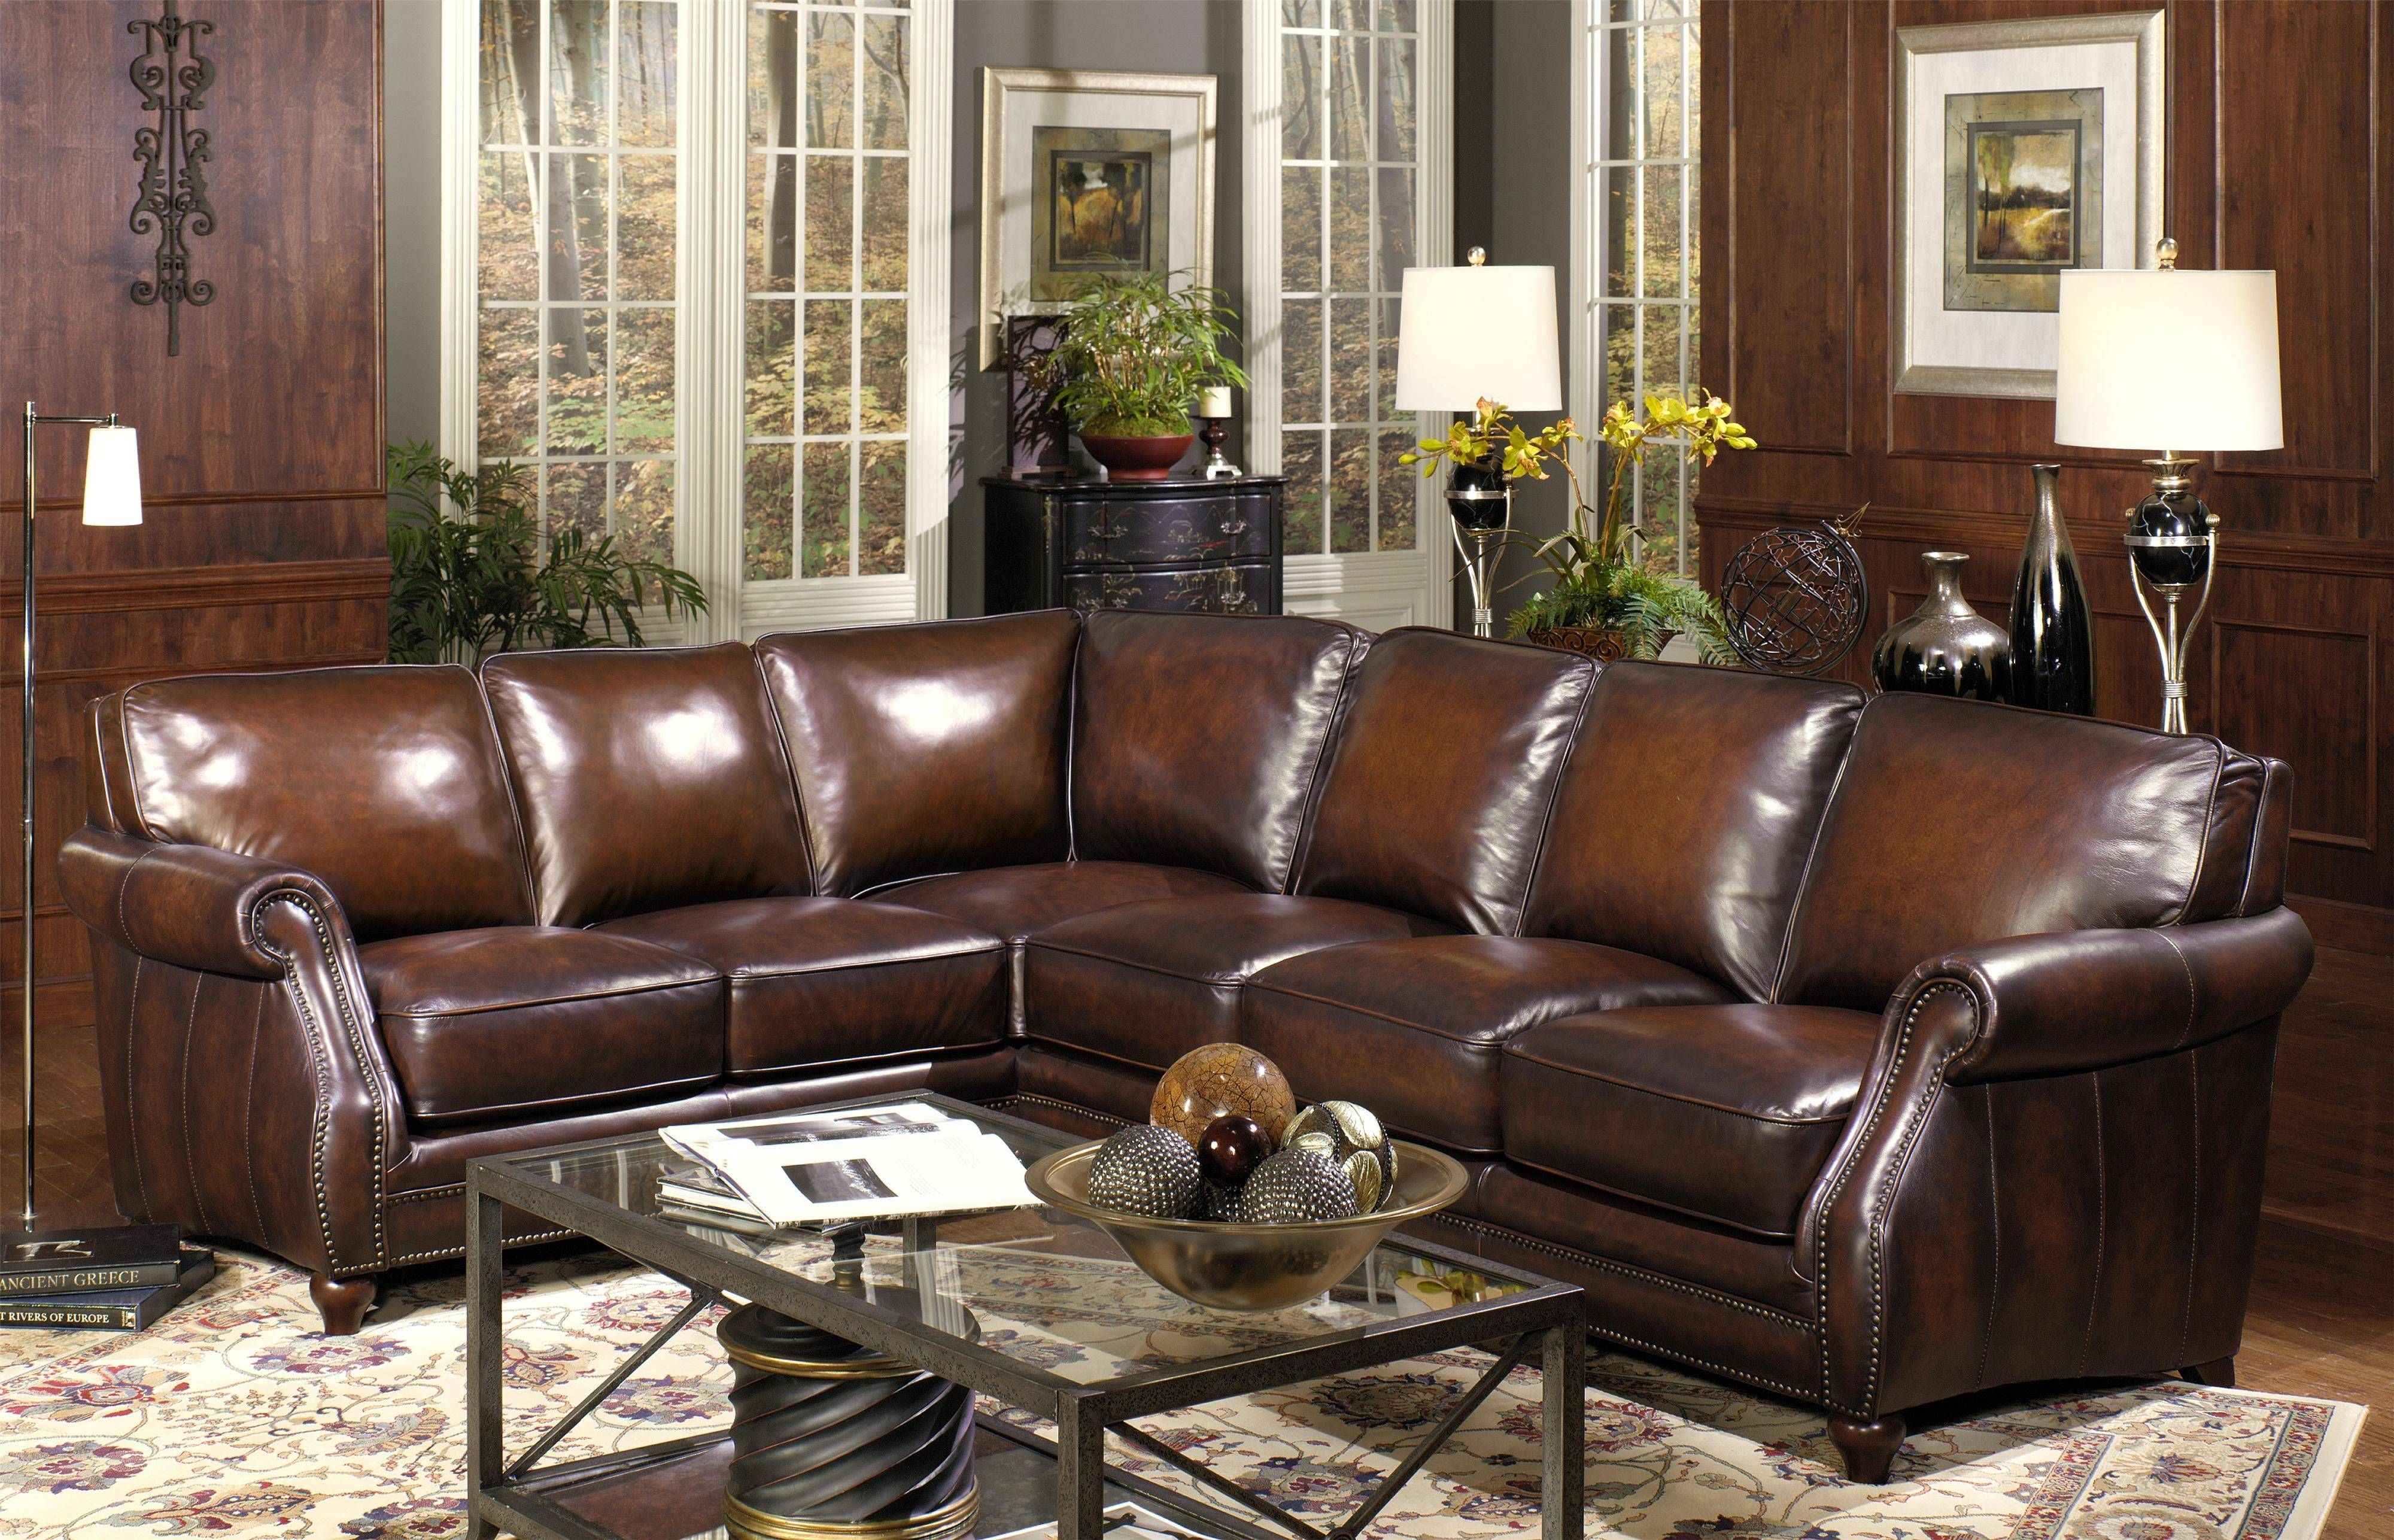 Awesome Traditional Sectional Sofas Living Room Furniture Ideas For Traditional Leather Sectional Sofas (View 2 of 15)